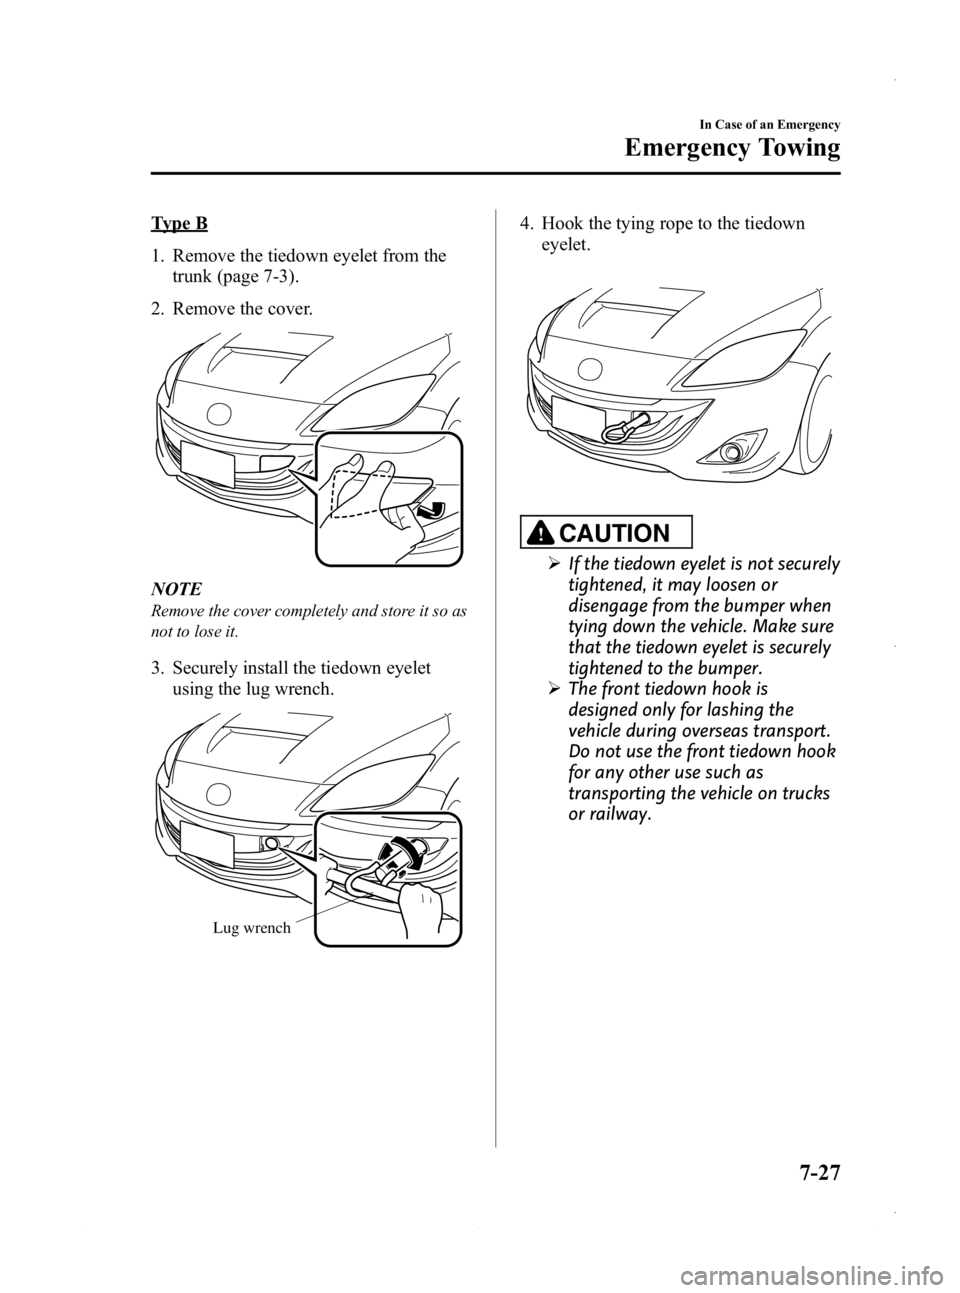 MAZDA MODEL 3 5-DOOR 2013  Owners Manual Black plate (463,1)
Type B
1. Remove the tiedown eyelet from thetrunk (page 7-3).
2. Remove the cover.
NOTE
Remove the cover completely and store it so as
not to lose it.
3. Securely install the tiedo